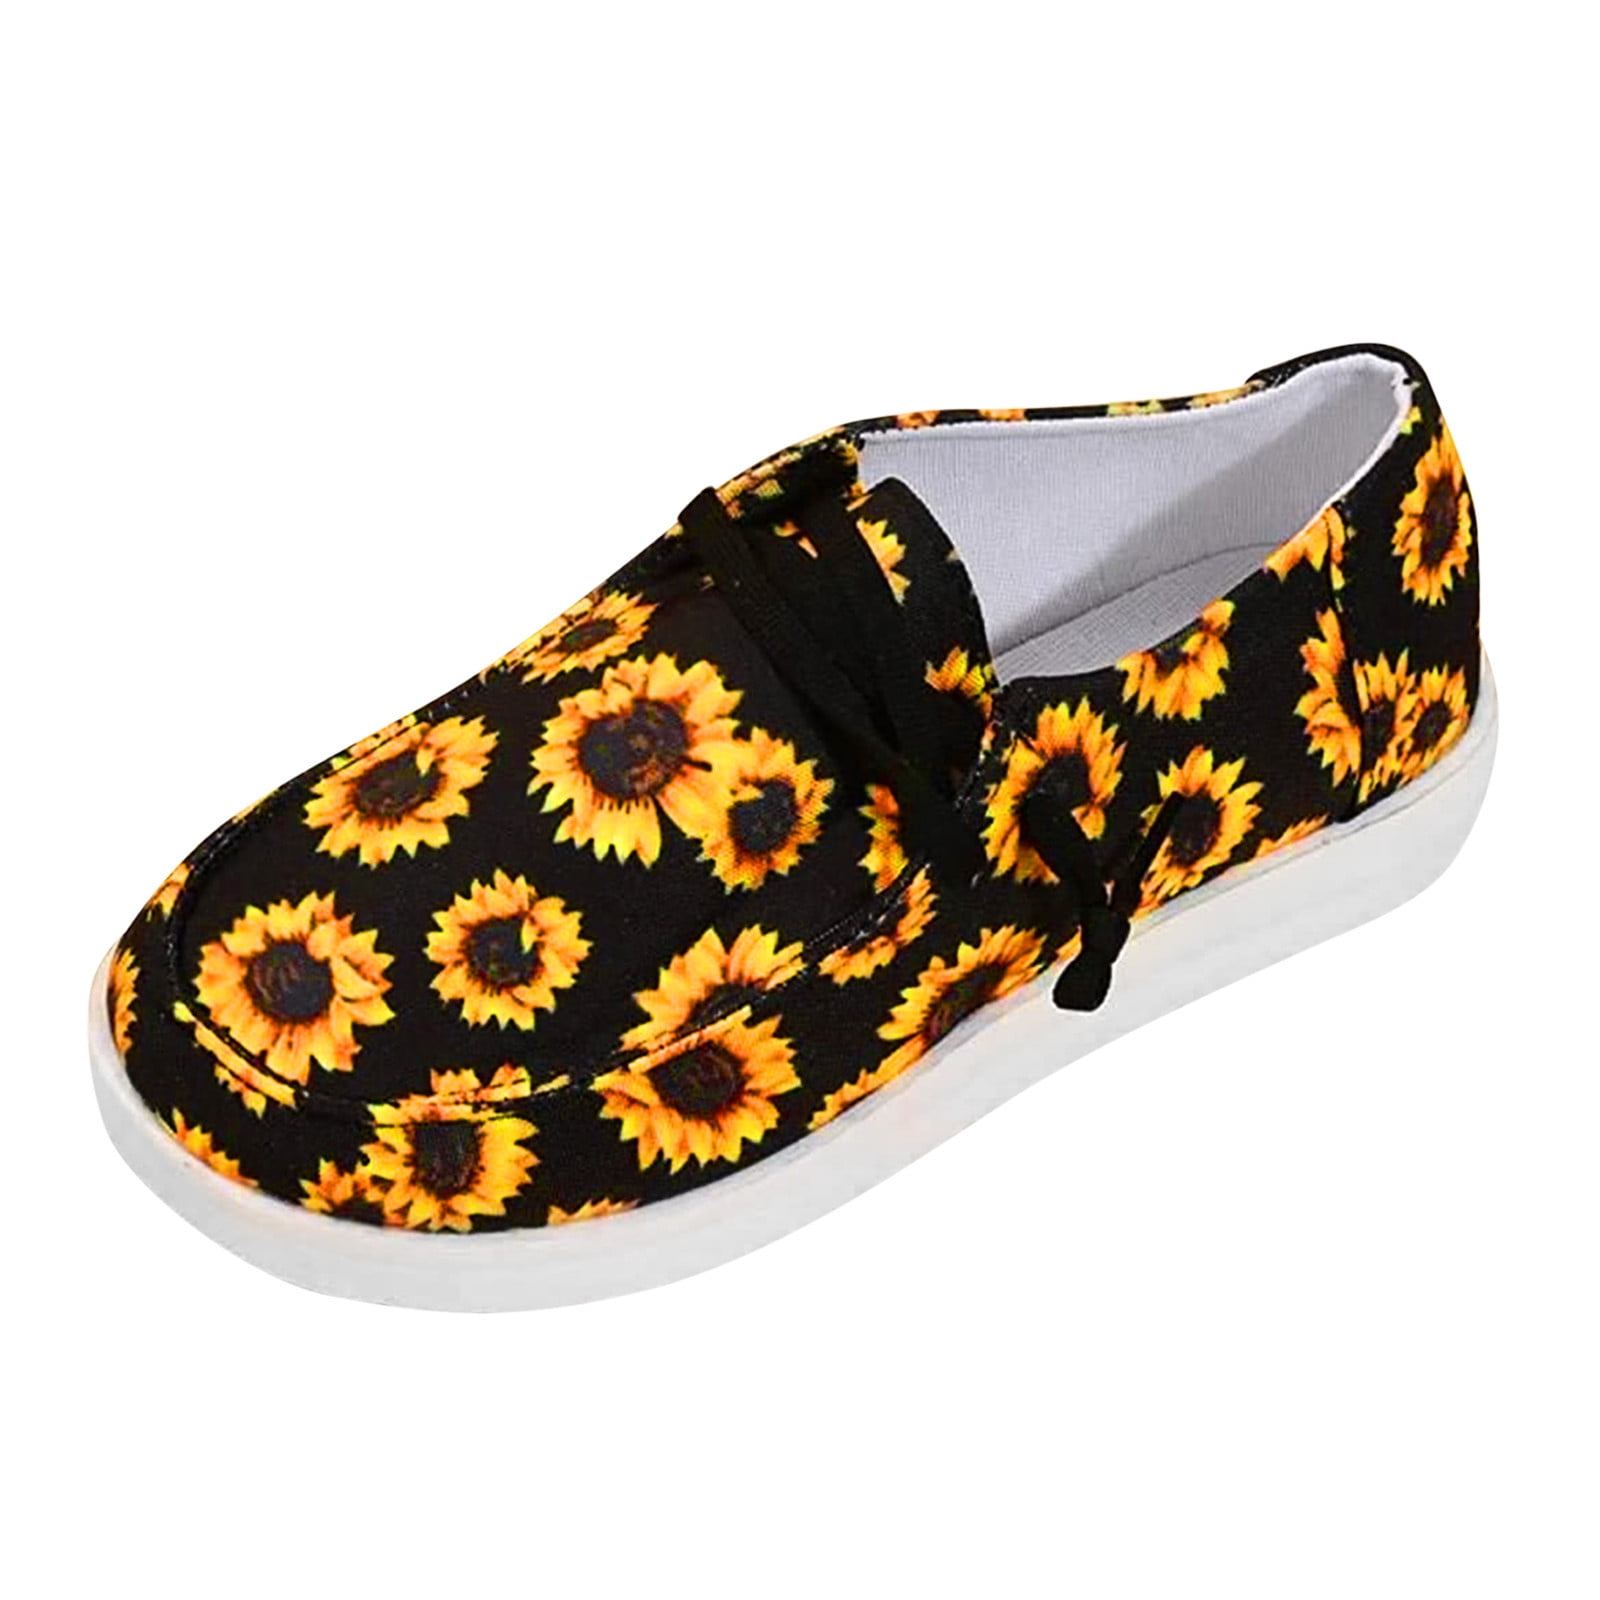 Womens Slip On Shoes Lace Up Flatform Canvas Shoes Floral Print Walking Shoes Daily Casual Shoes Sneakers for Women 